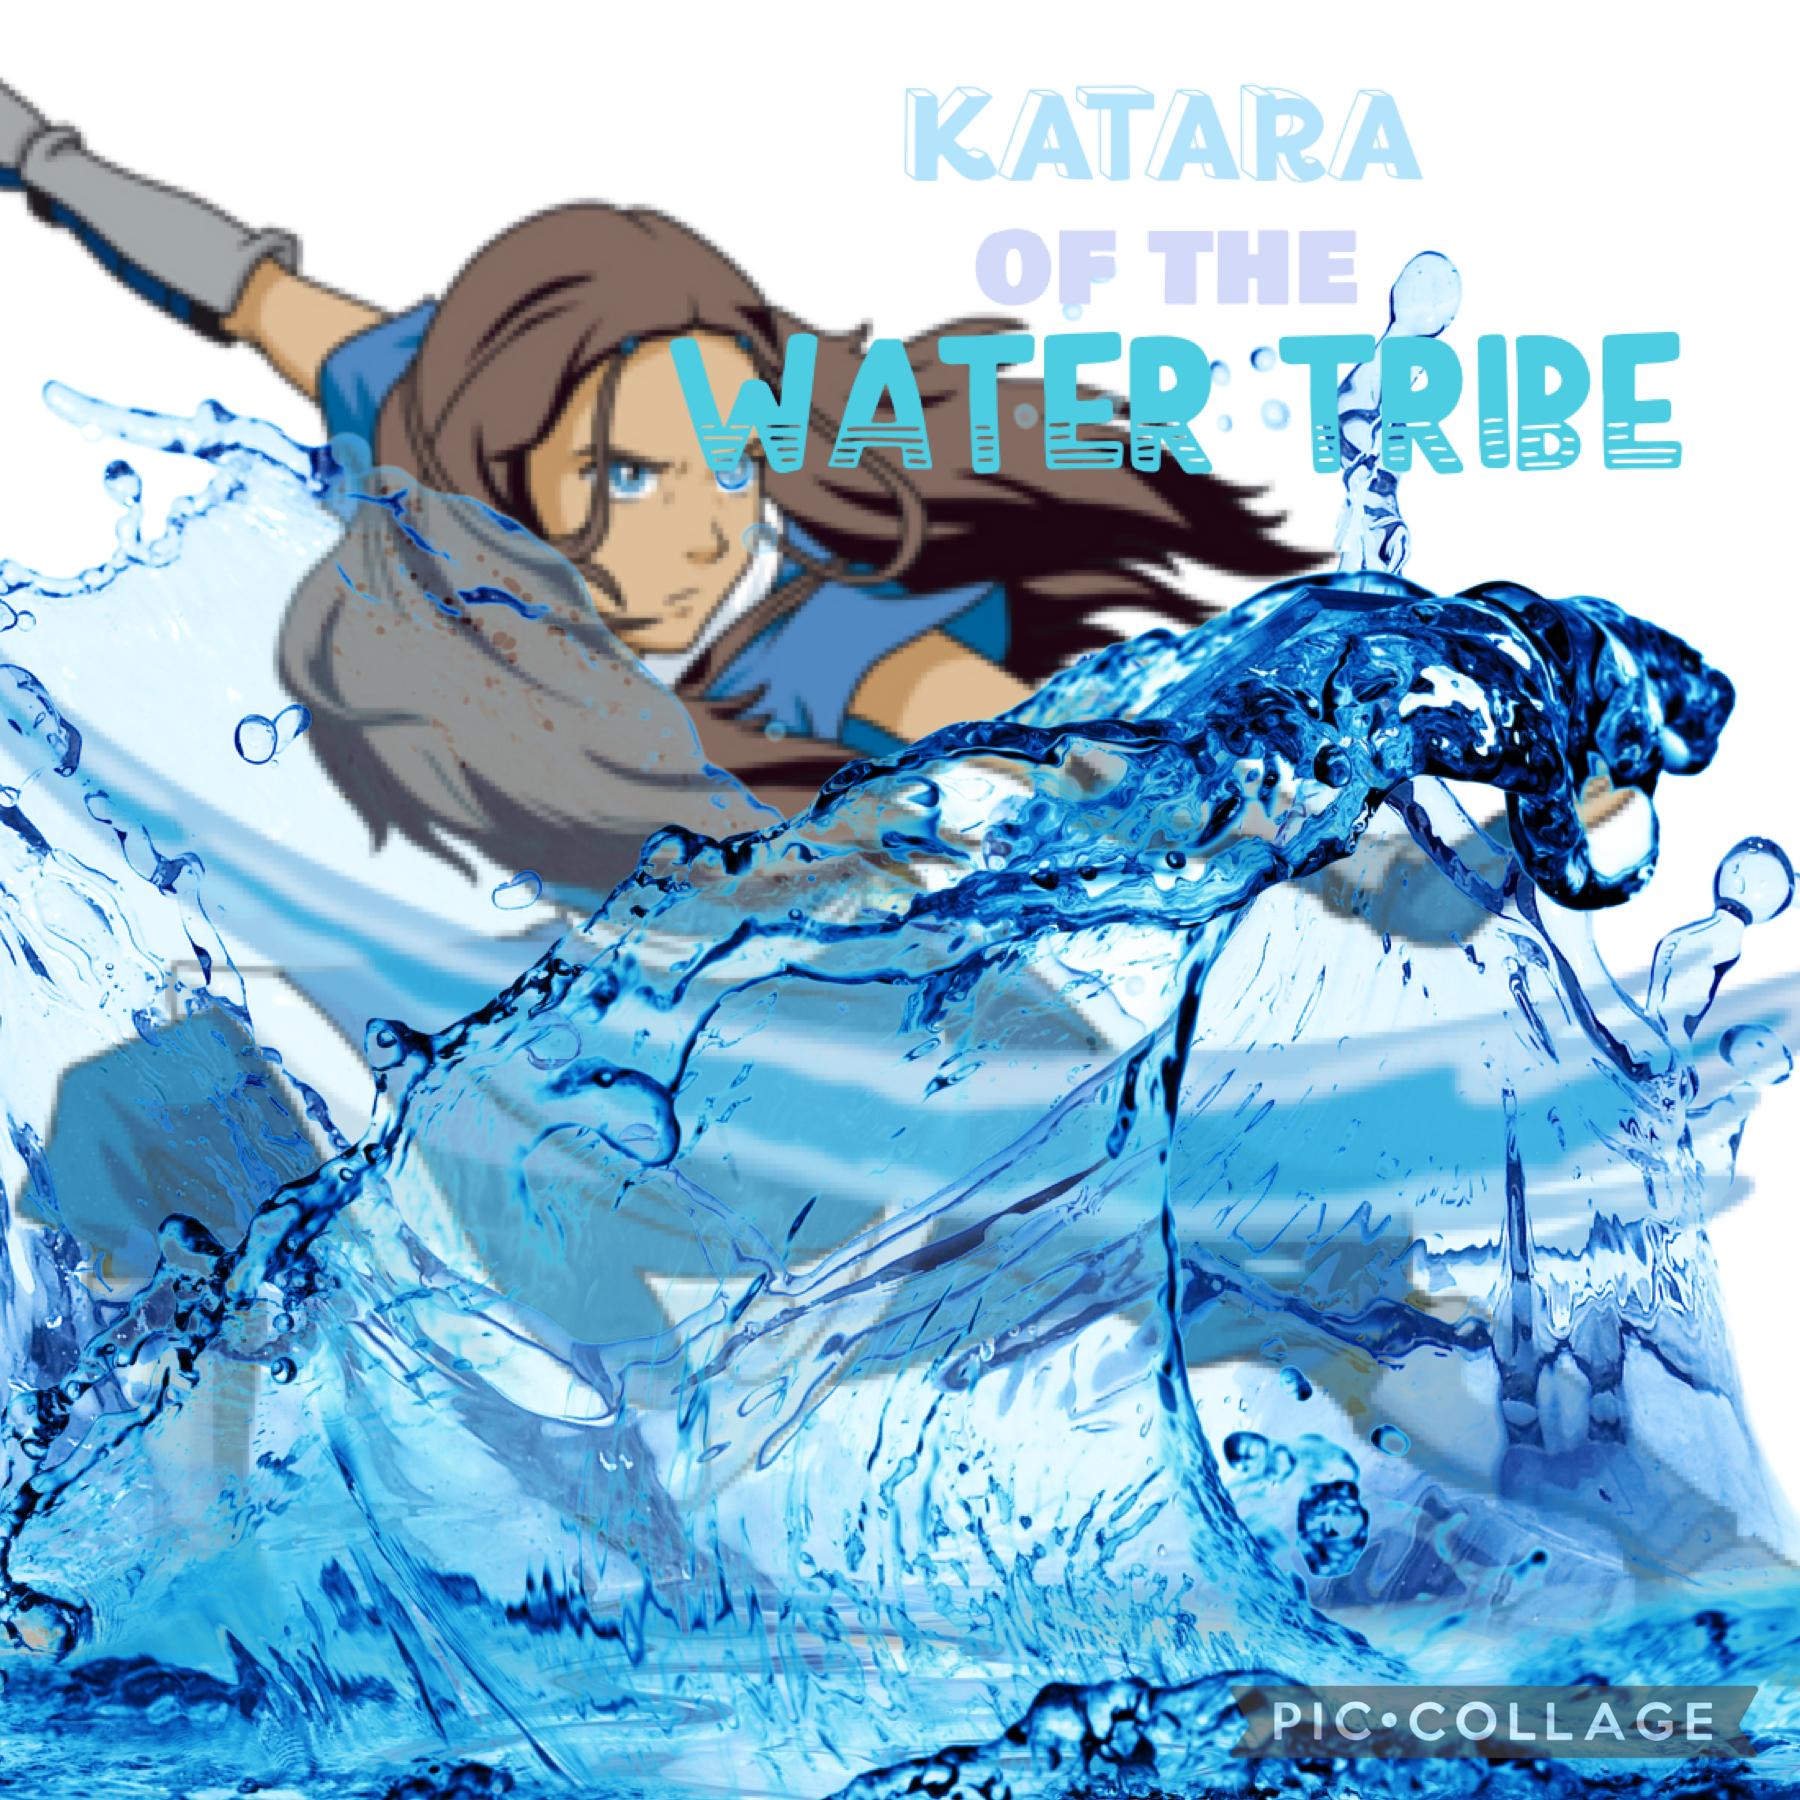 Tap!

Katara of the Water Tribe. My inspiration for my new username:
Waterbender! If you comment your zodiac I can tell you which one you are! (I’m actually Air but whatever lol)